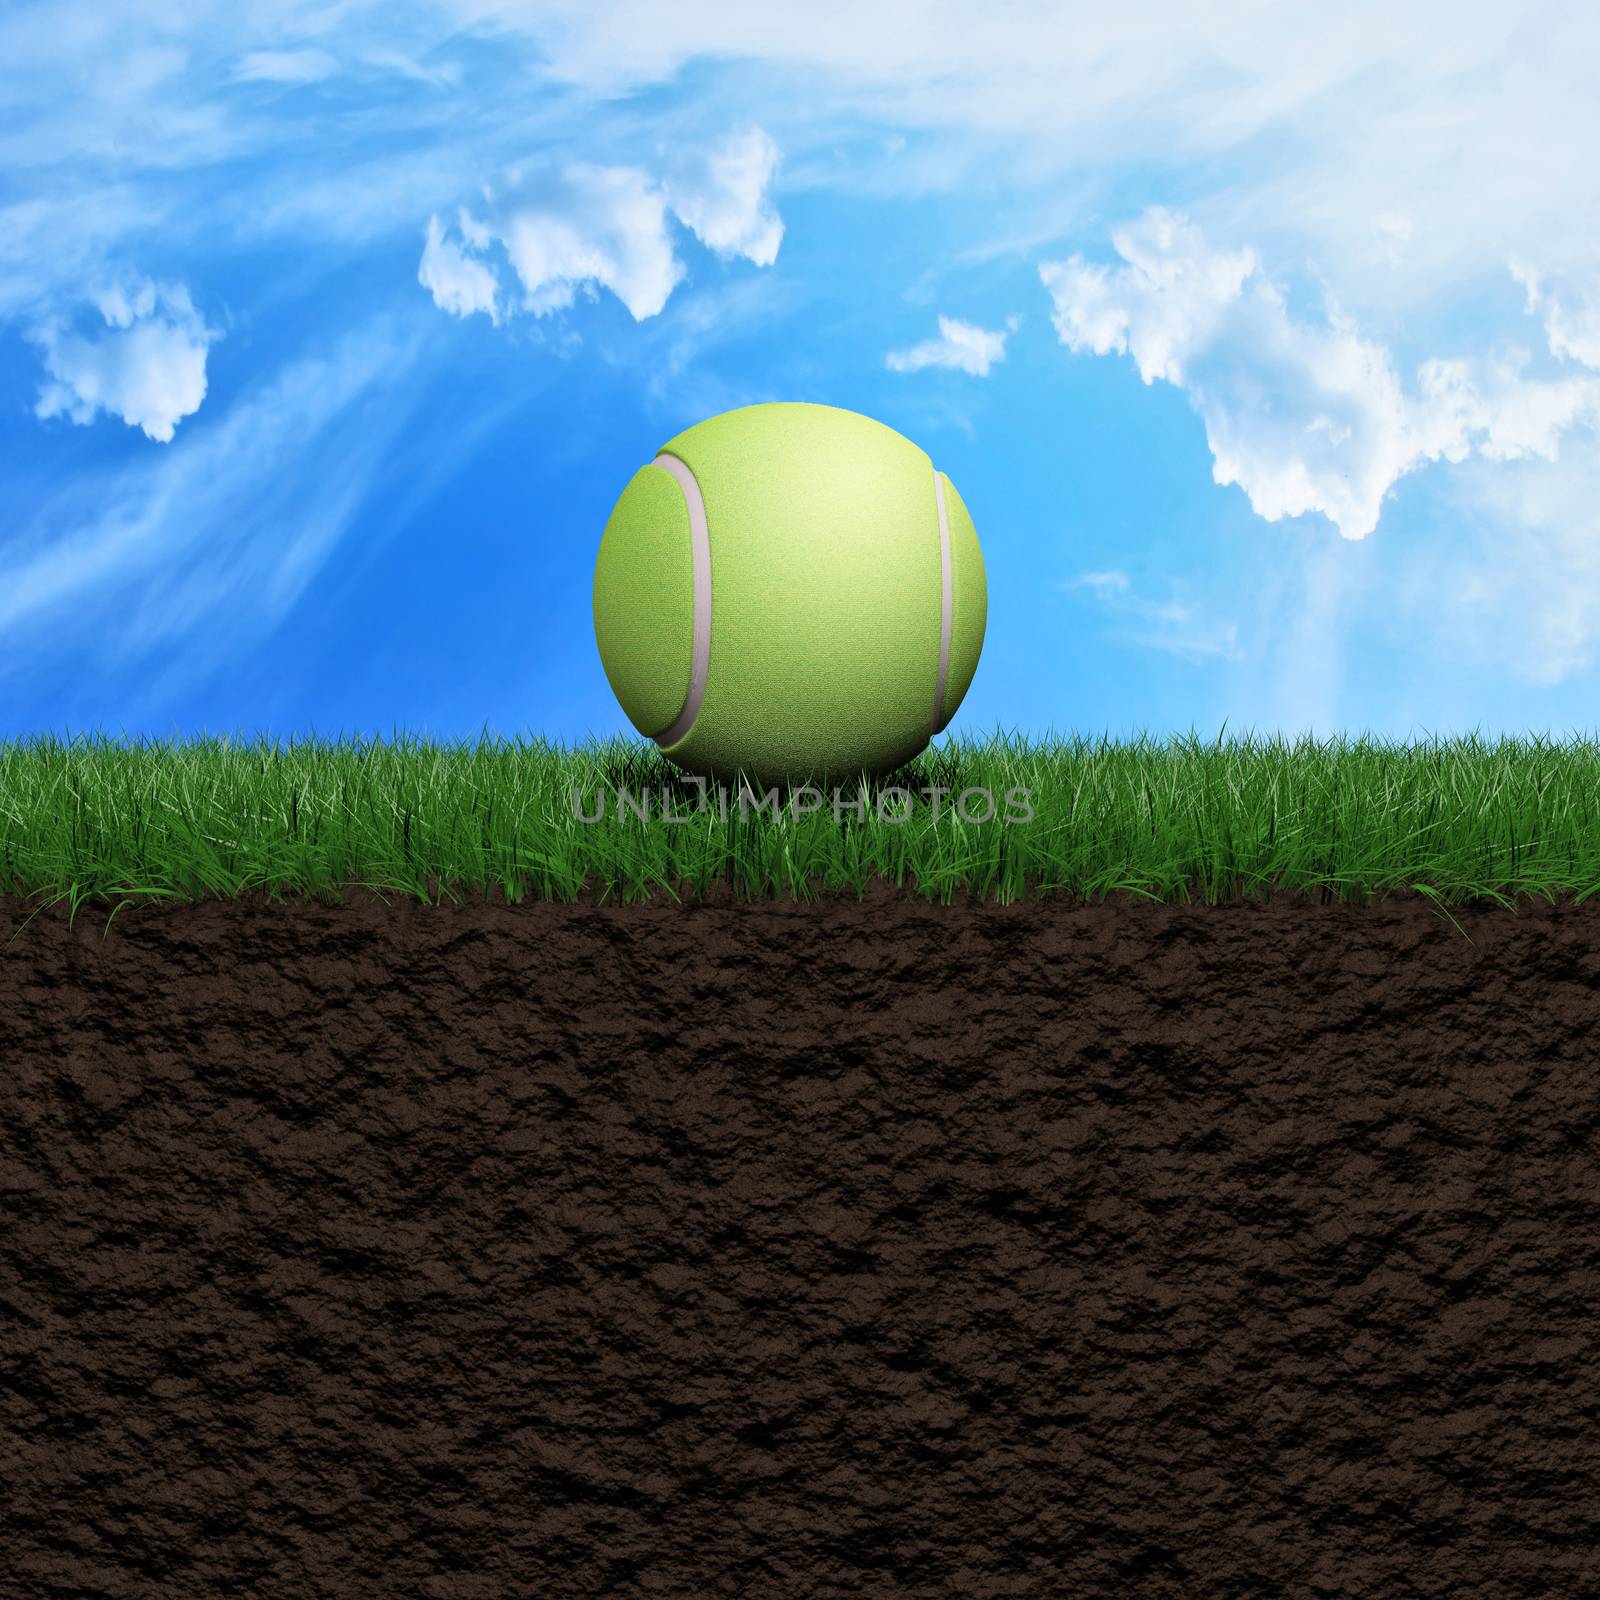 Tenis ball background by dynamicfoto